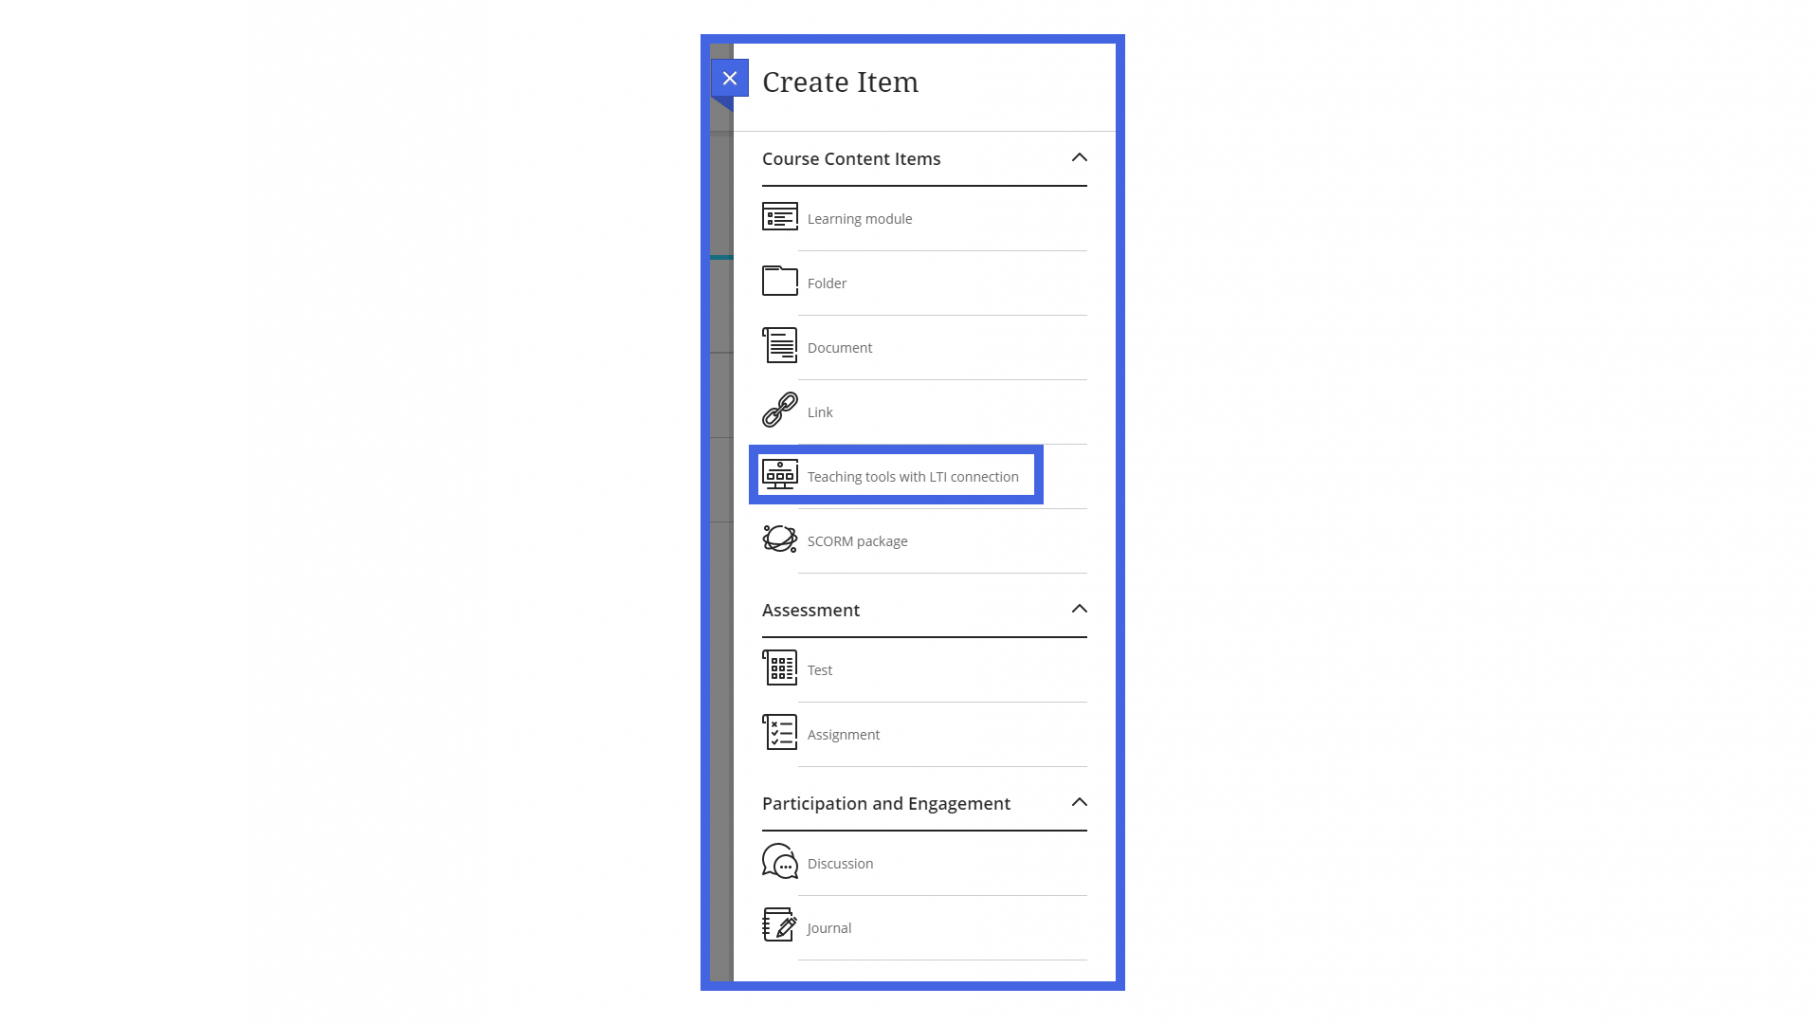 Blackboard create item menu highlighting Teaching Tools with LTI connection option highlighted